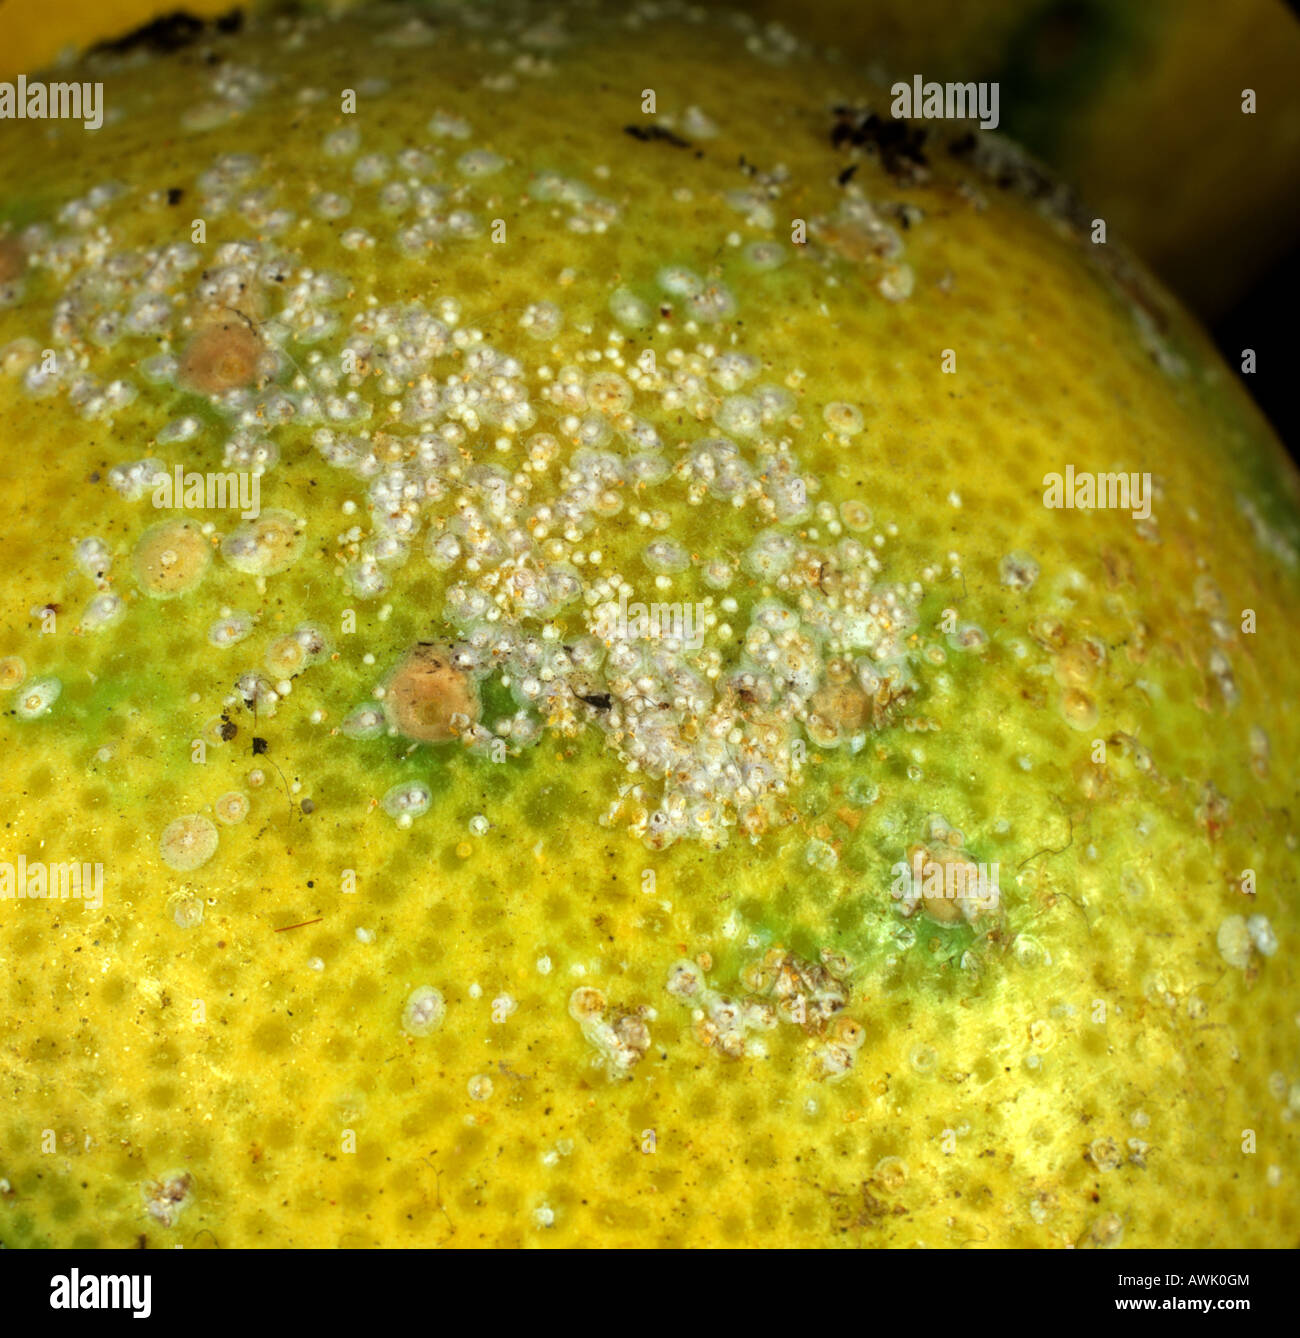 Yellow scale insect Aonidiella citrina on lemon fruit Stock Photo